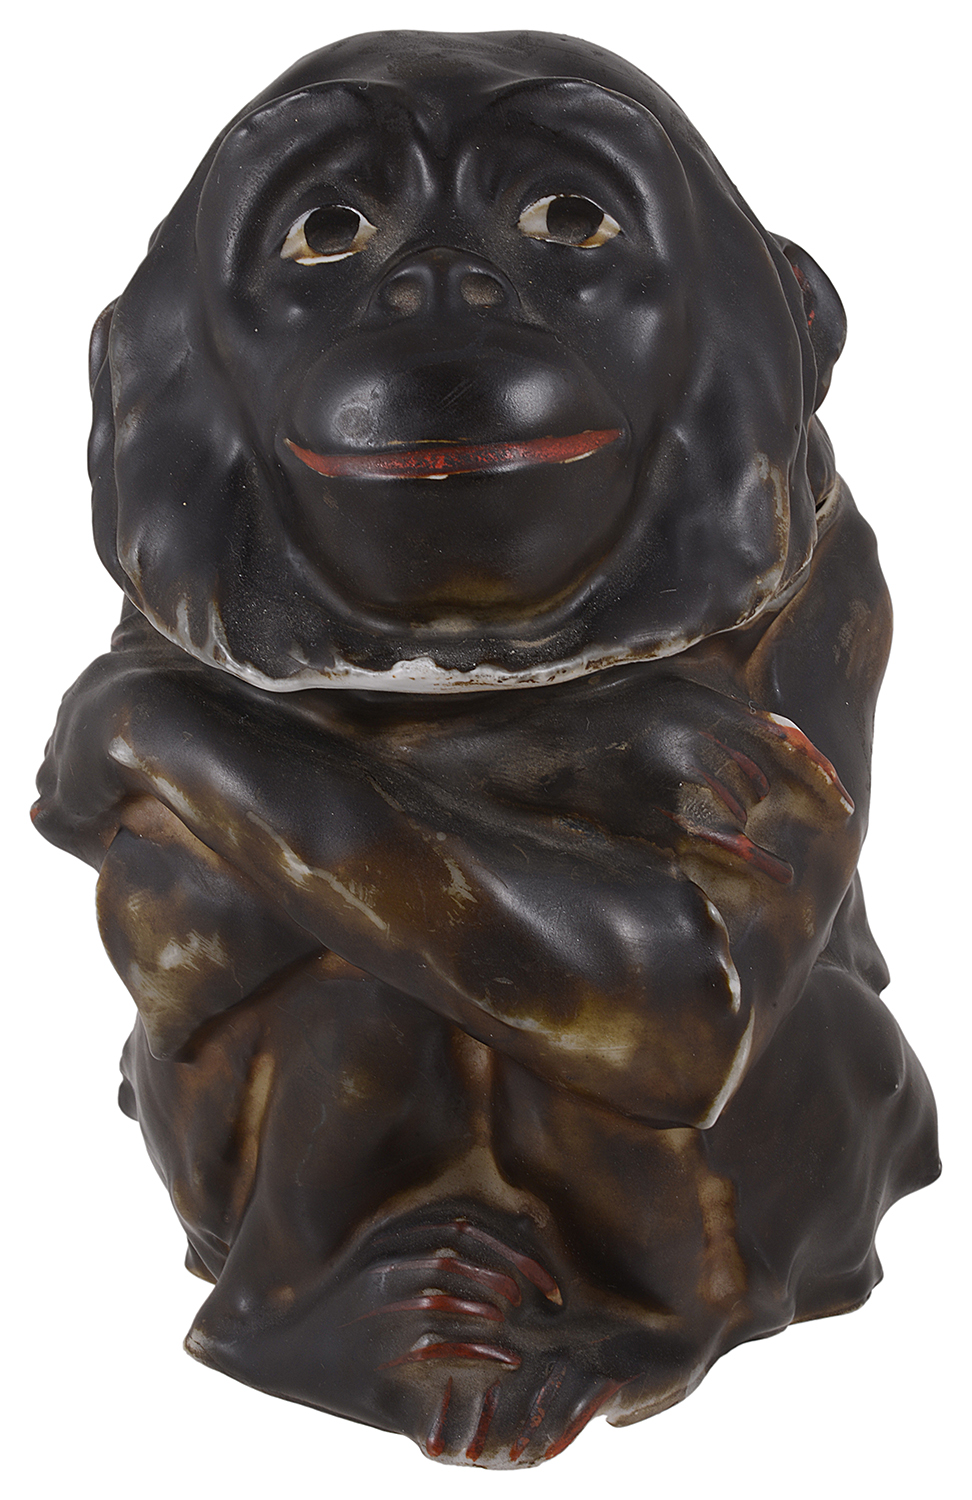 A 20th century hard paste porcelain tobacco jar in the form of a monkey